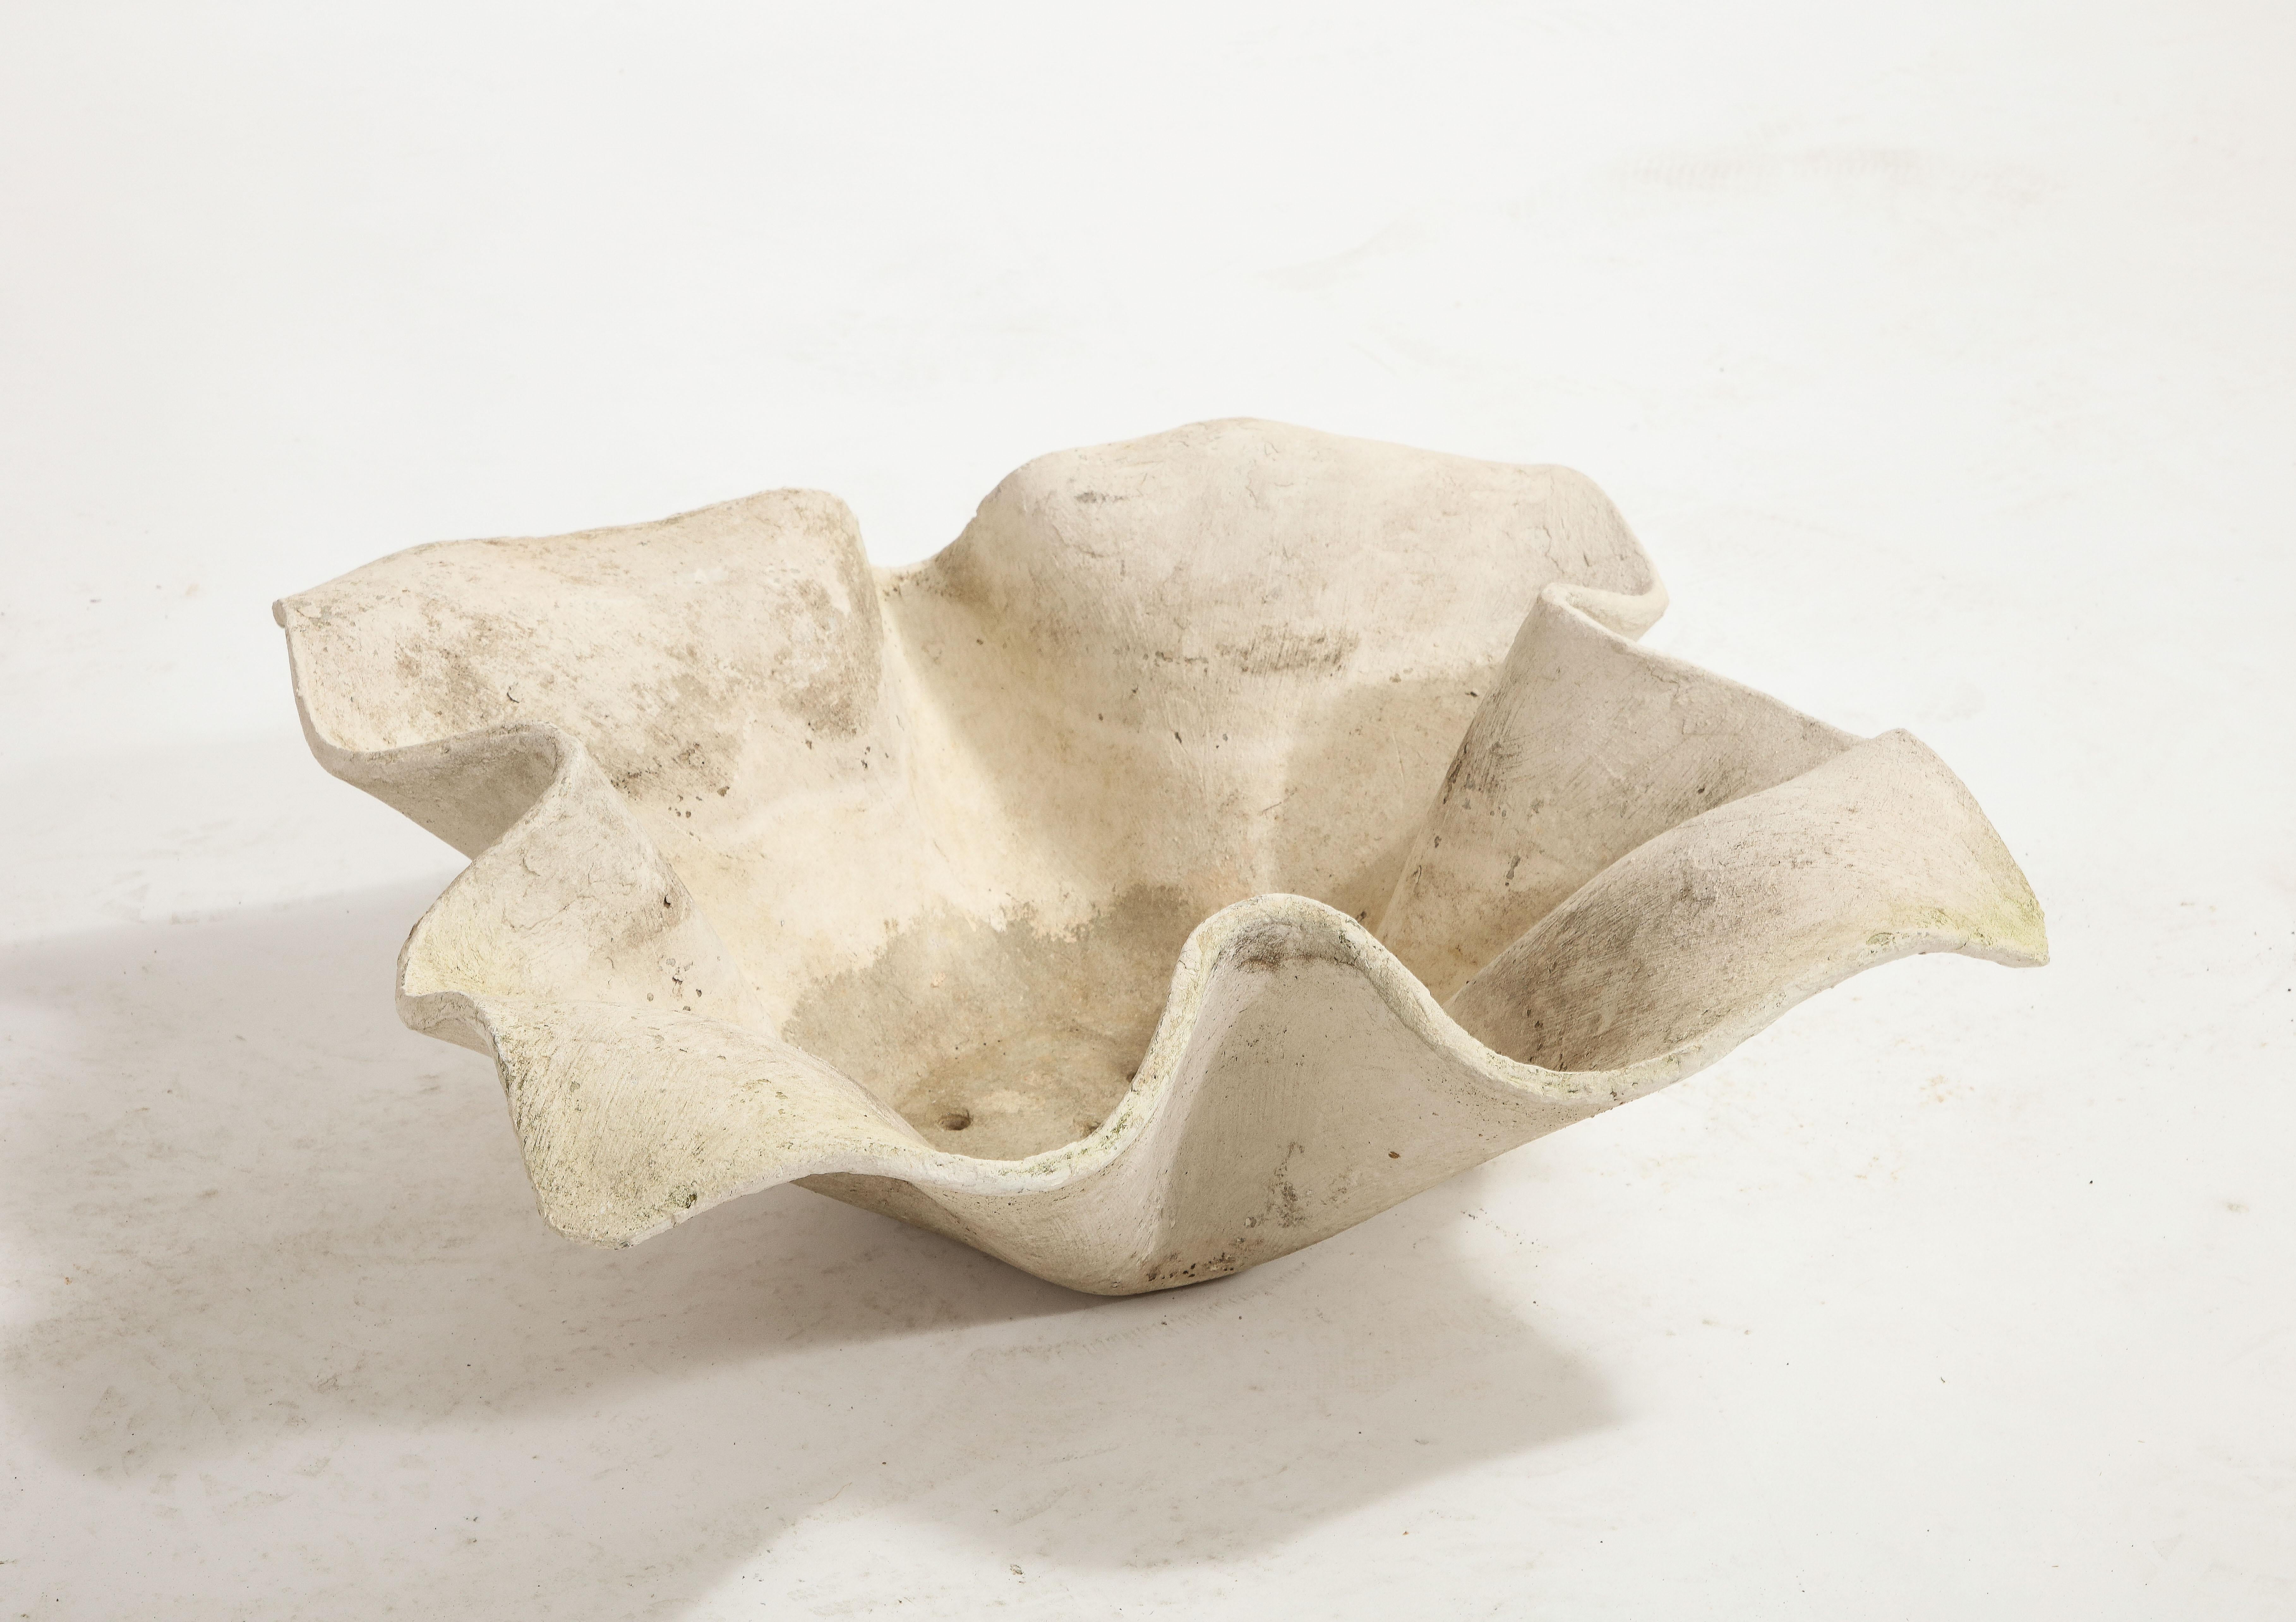 Willy Guhl for Eternit Handkerchief Concrete Planters, 1960s For Sale 3